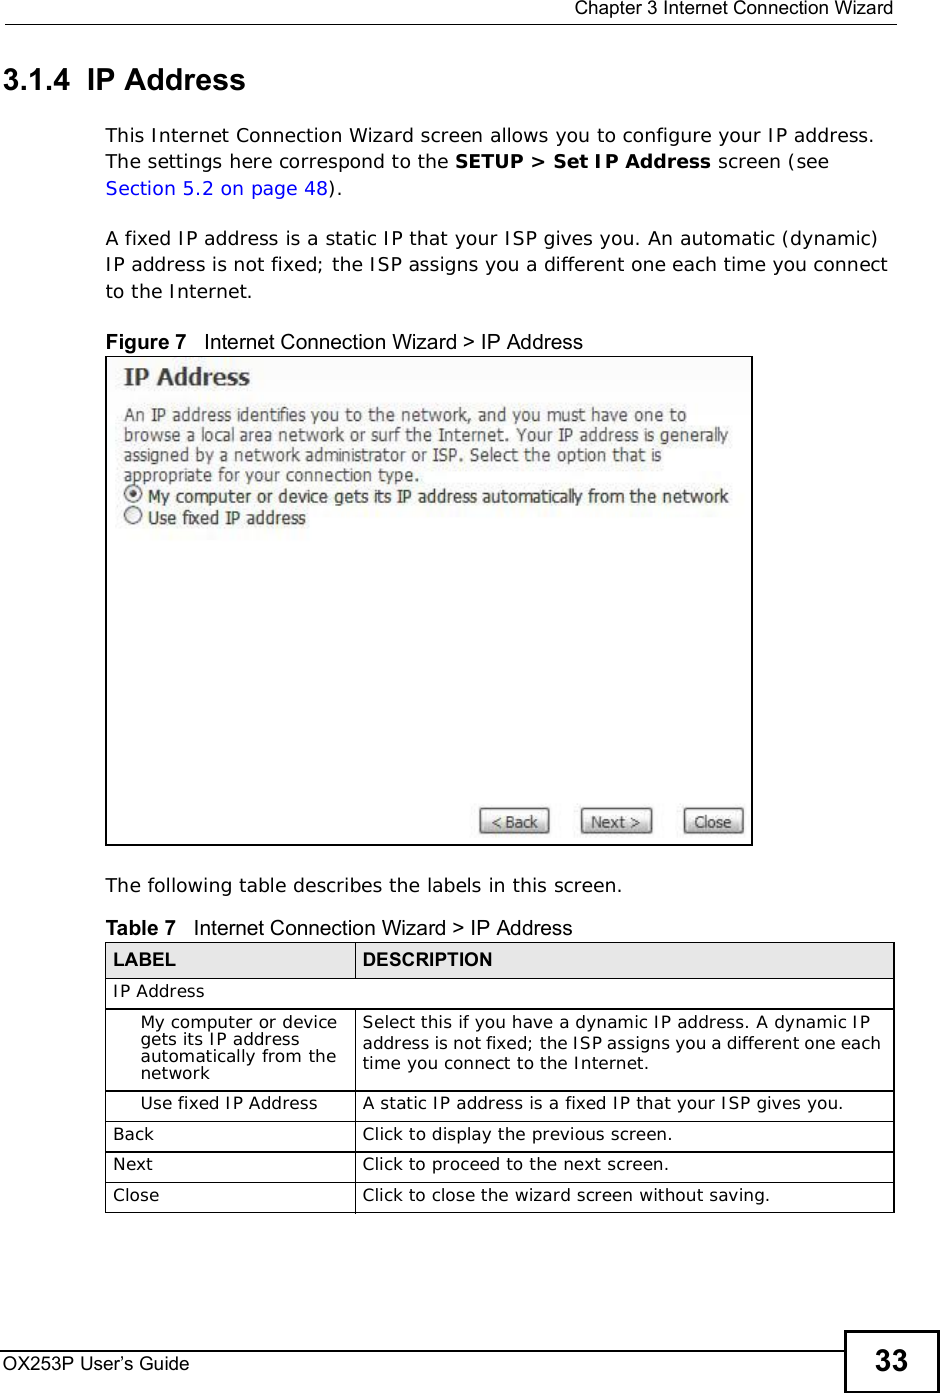  Chapter 3Internet Connection WizardOX253P User’s Guide 333.1.4  IP AddressThis Internet Connection Wizard screen allows you to configure your IP address. The settings here correspond to the SETUP &gt; Set IP Address screen (see Section 5.2 on page 48).A fixed IP address is a static IP that your ISP gives you. An automatic (dynamic) IP address is not fixed; the ISP assigns you a different one each time you connect to the Internet.Figure 7   Internet Connection Wizard &gt; IP AddressThe following table describes the labels in this screen.Table 7   Internet Connection Wizard &gt; IP AddressLABEL DESCRIPTIONIP AddressMy computer or device gets its IP address automatically from the networkSelect this if you have a dynamic IP address. A dynamic IP address is not fixed; the ISP assigns you a different one each time you connect to the Internet.Use fixed IP AddressA static IP address is a fixed IP that your ISP gives you.BackClick to display the previous screen.Next Click to proceed to the next screen.Close Click to close the wizard screen without saving.